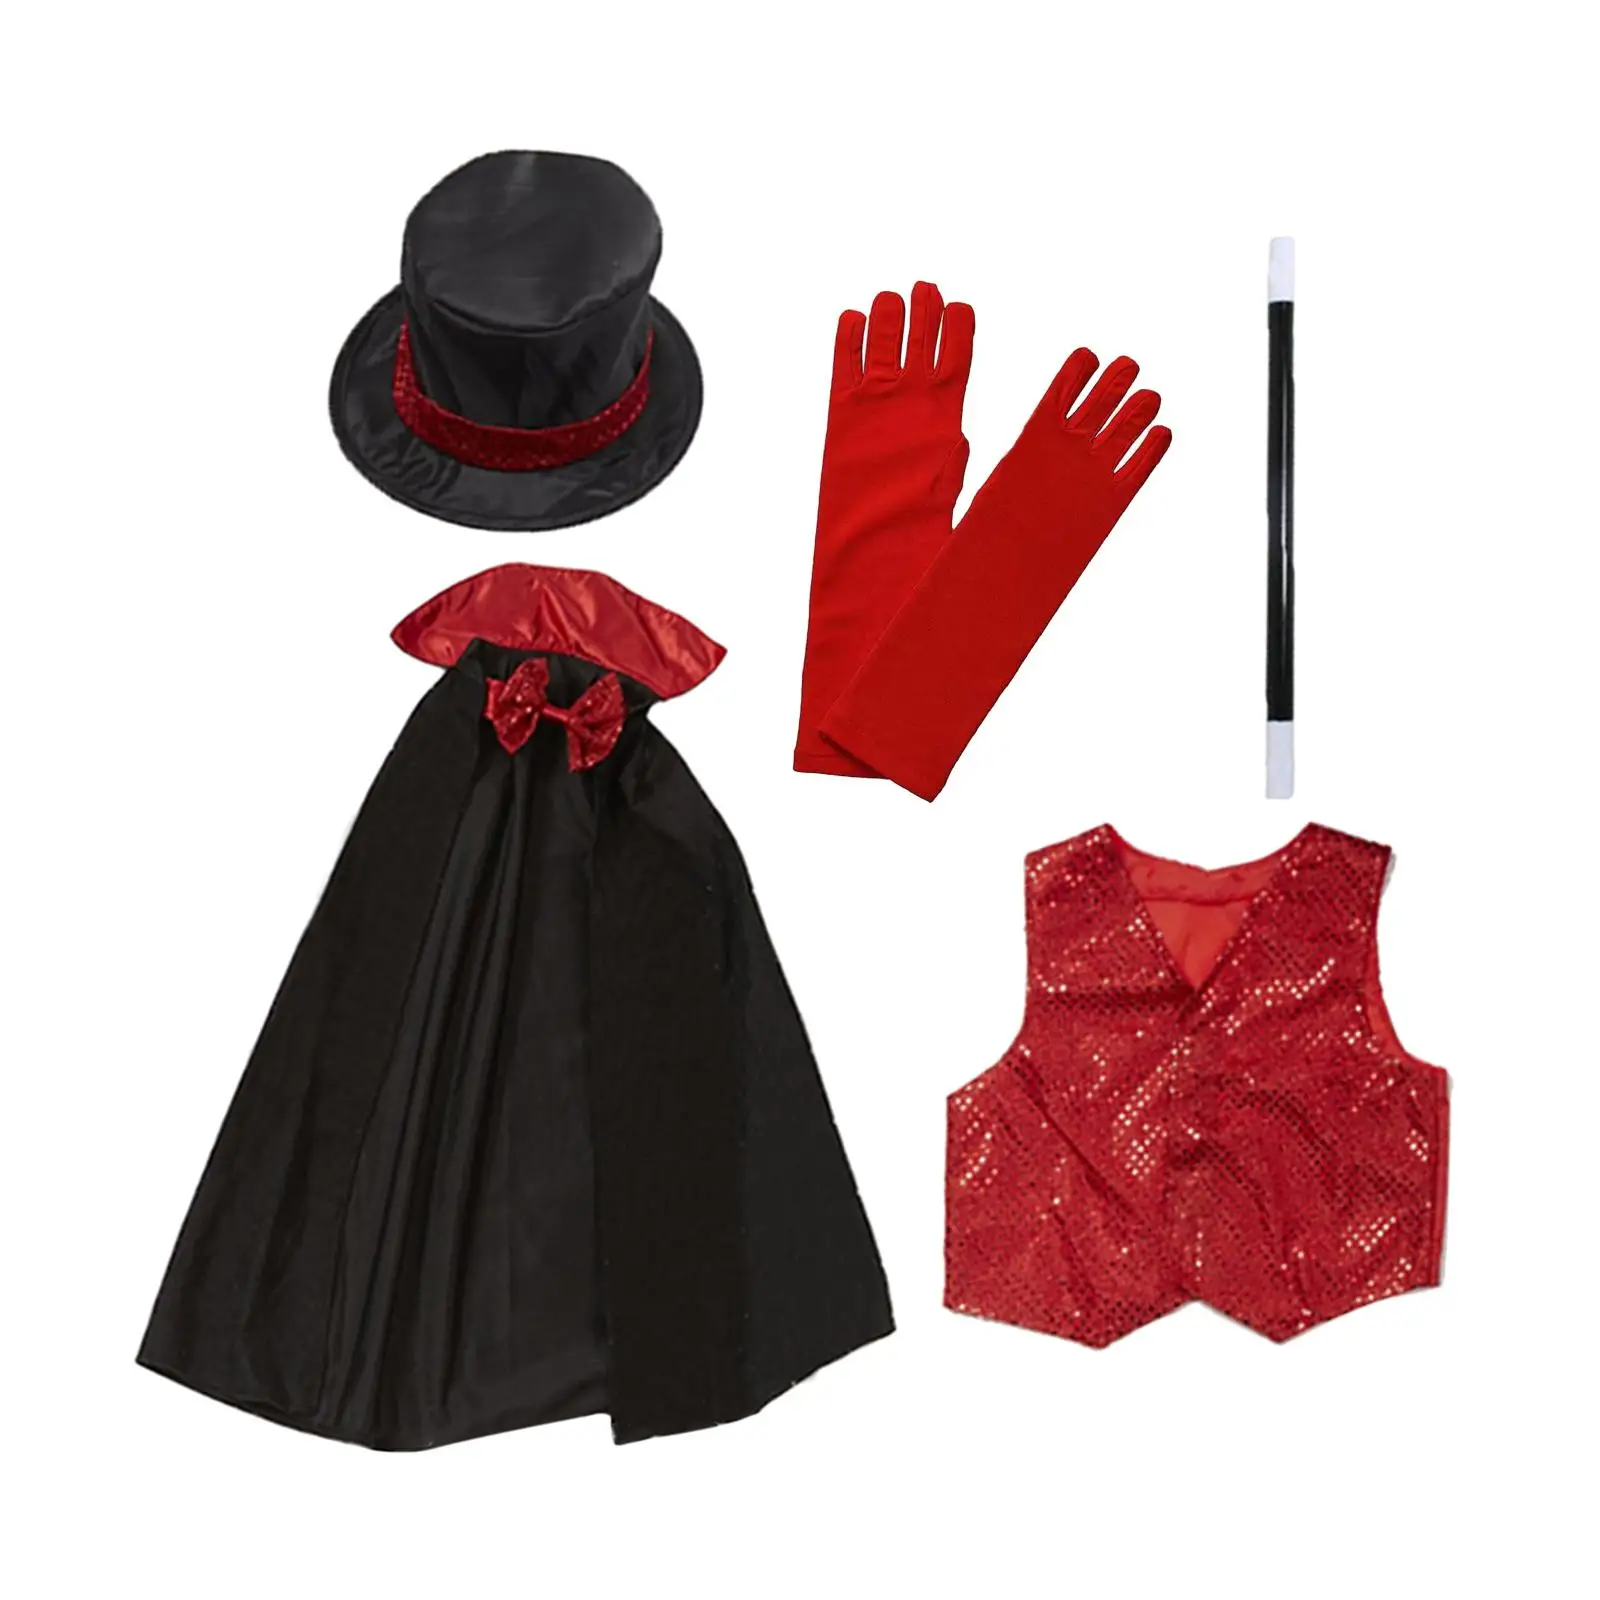 Magician Role party Cloak Cosplay Costume Dance Costume Set Stage Performance Magician Accessory Set for Christmas Kids